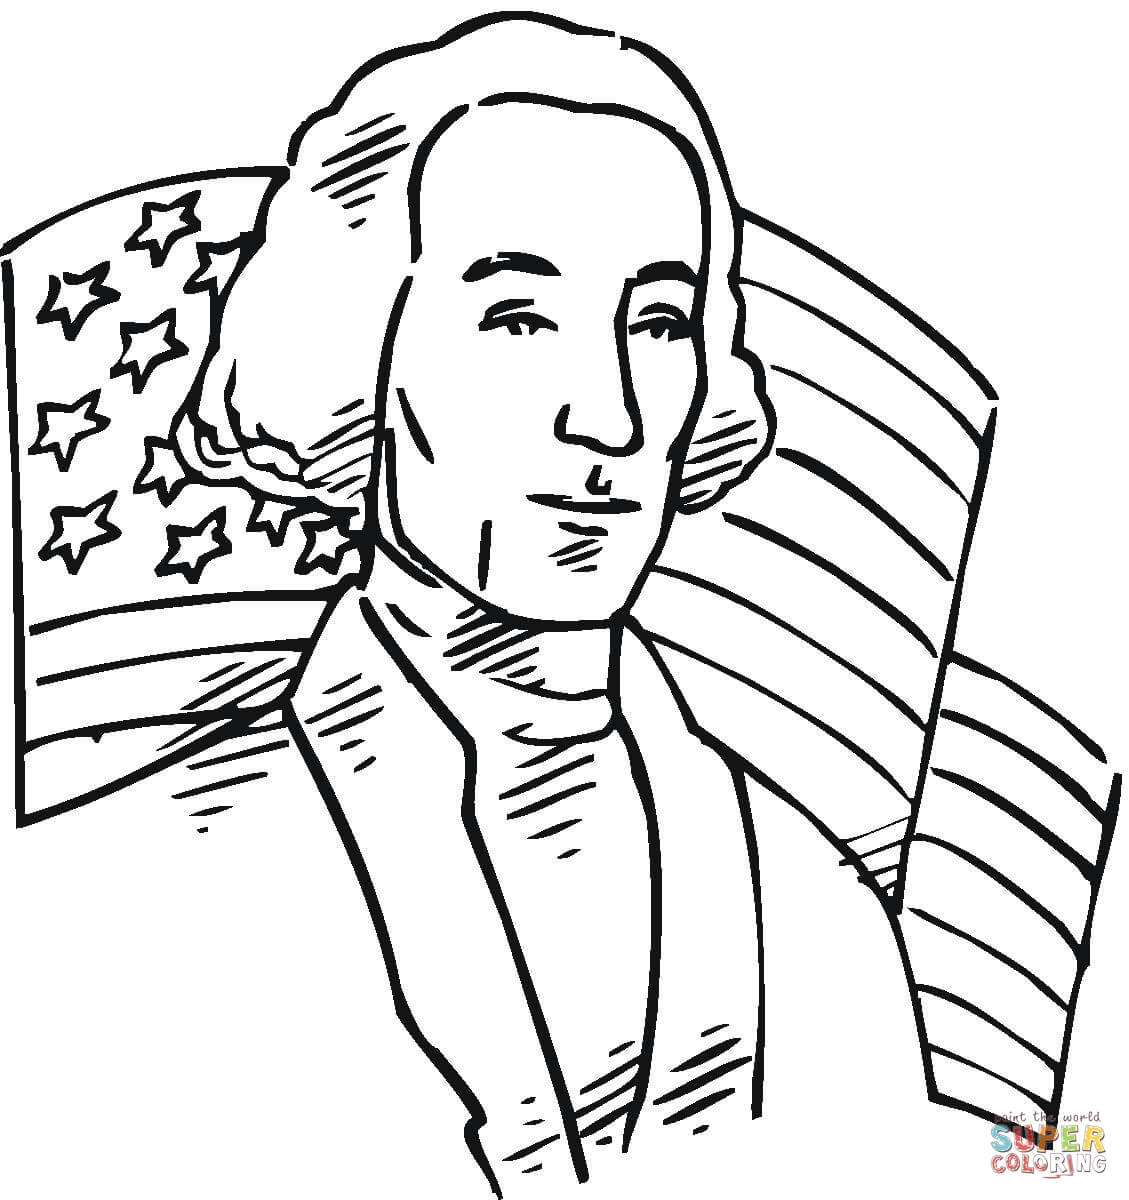 President george washington coloring pages download and